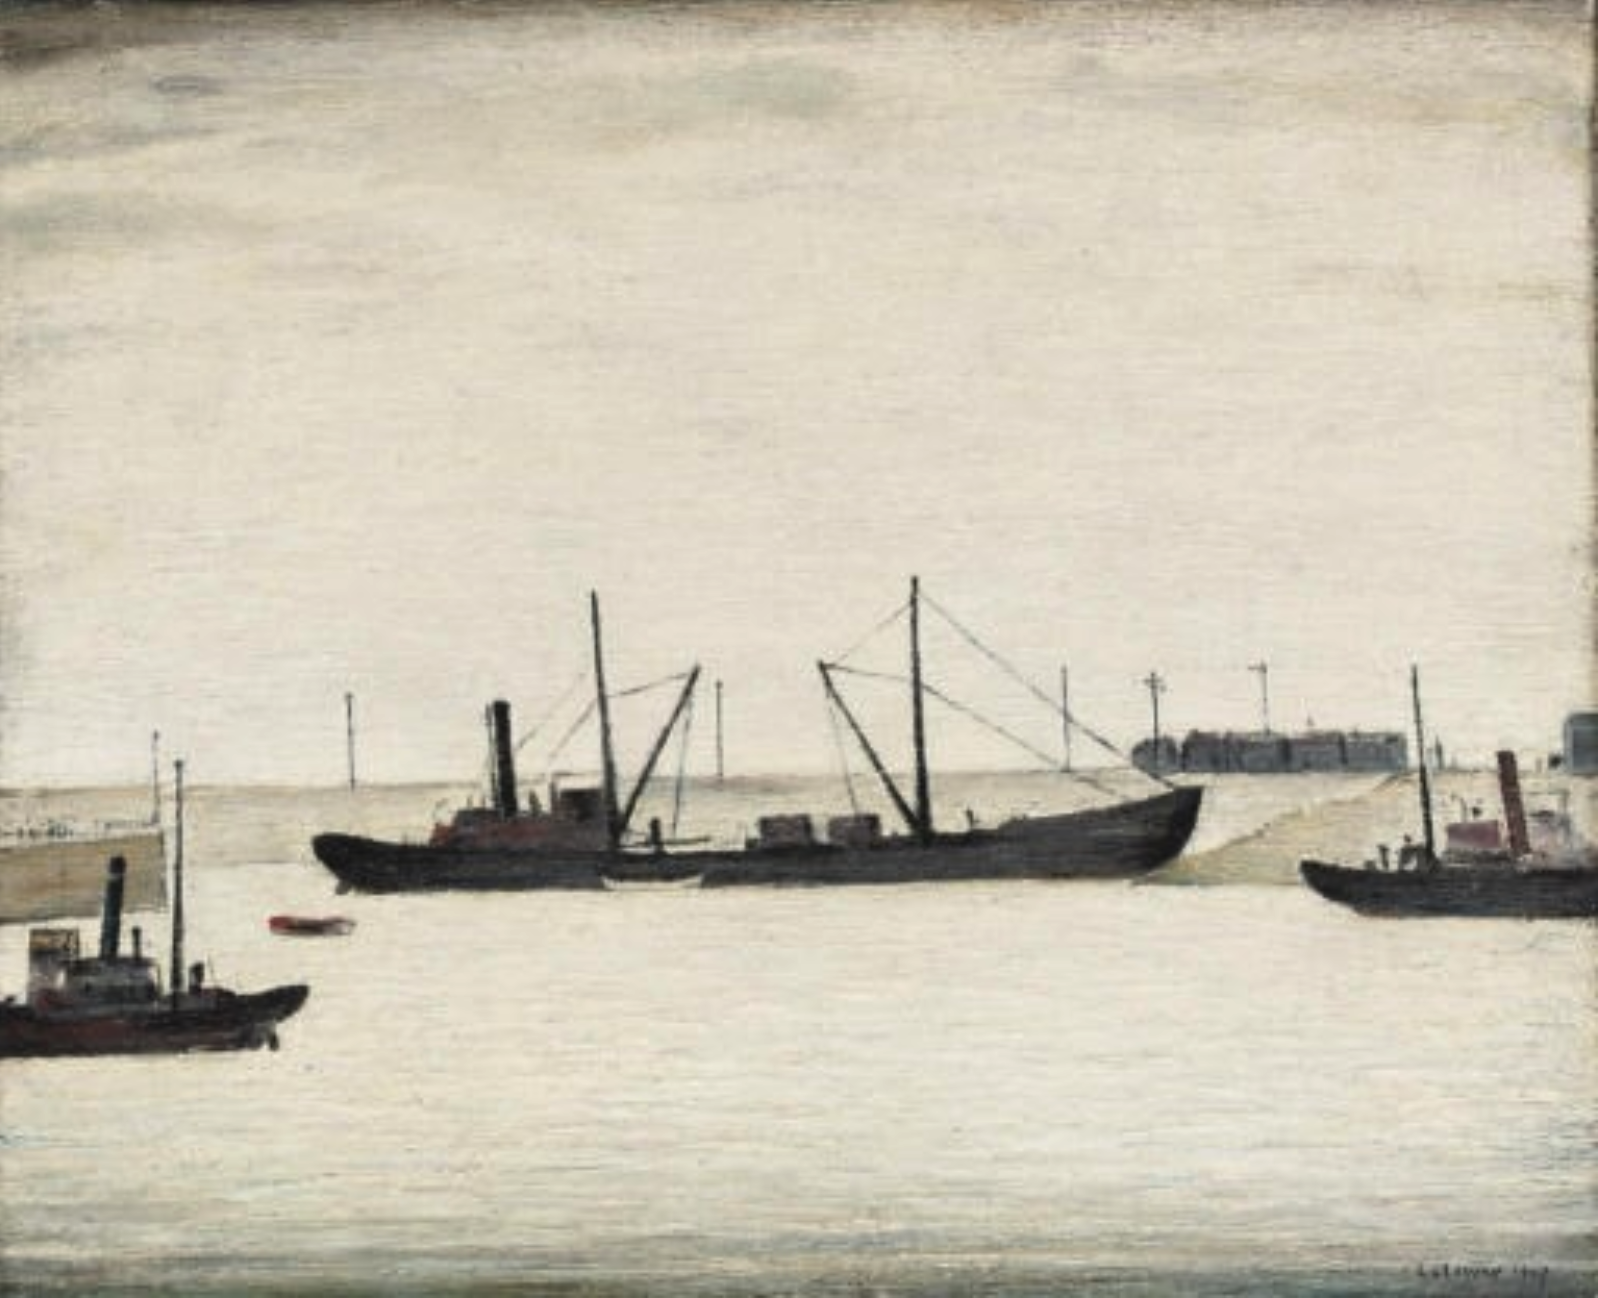 Lowestoft Harbour (1947) by Laurence Stephen Lowry (1887 - 1976), English artist.